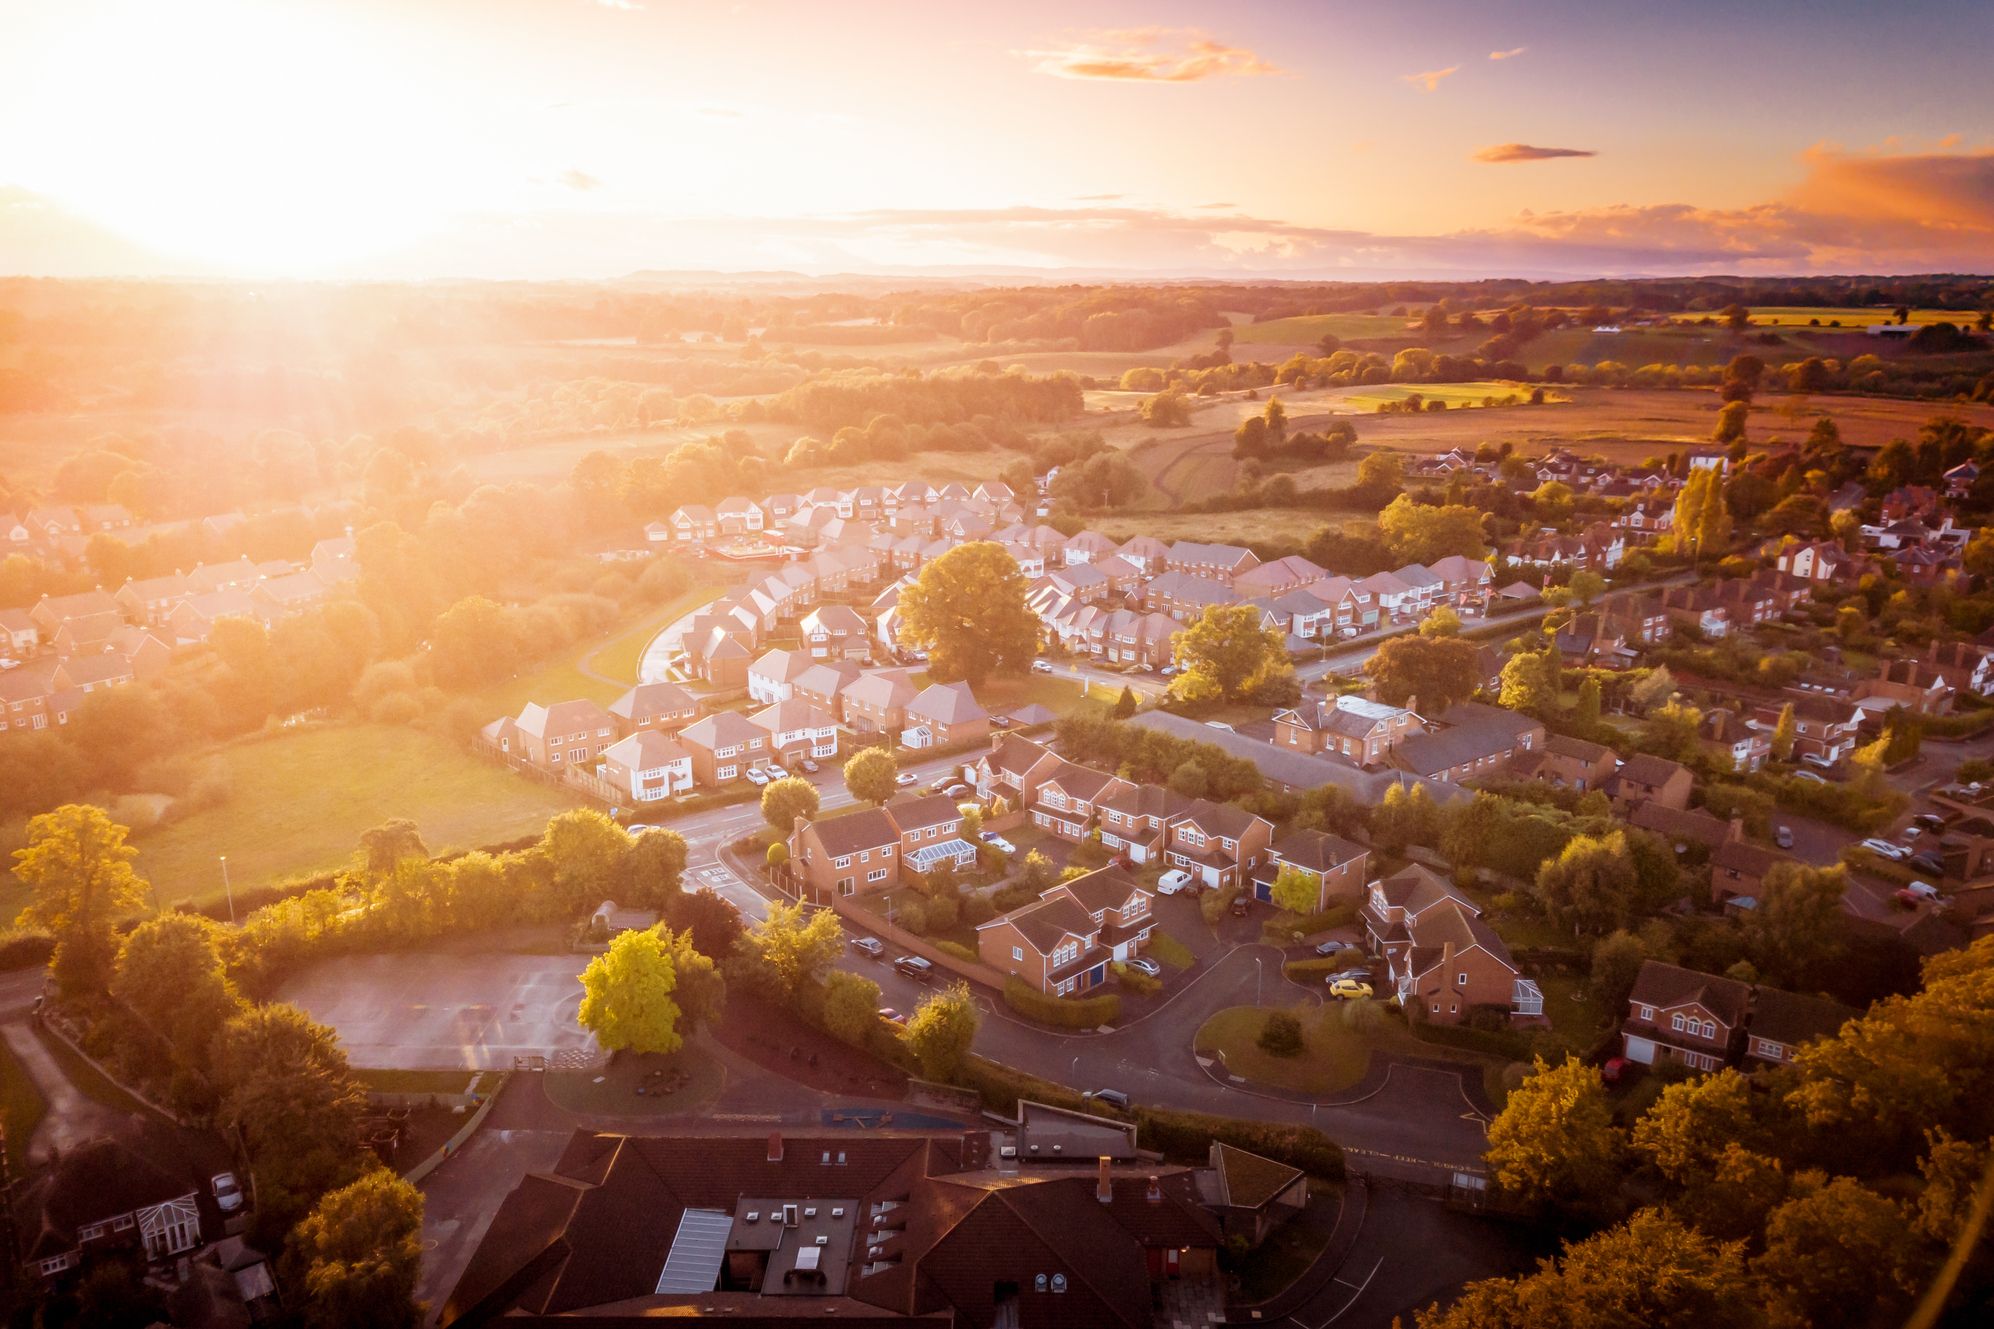 A suburban community at sunset from aerial view